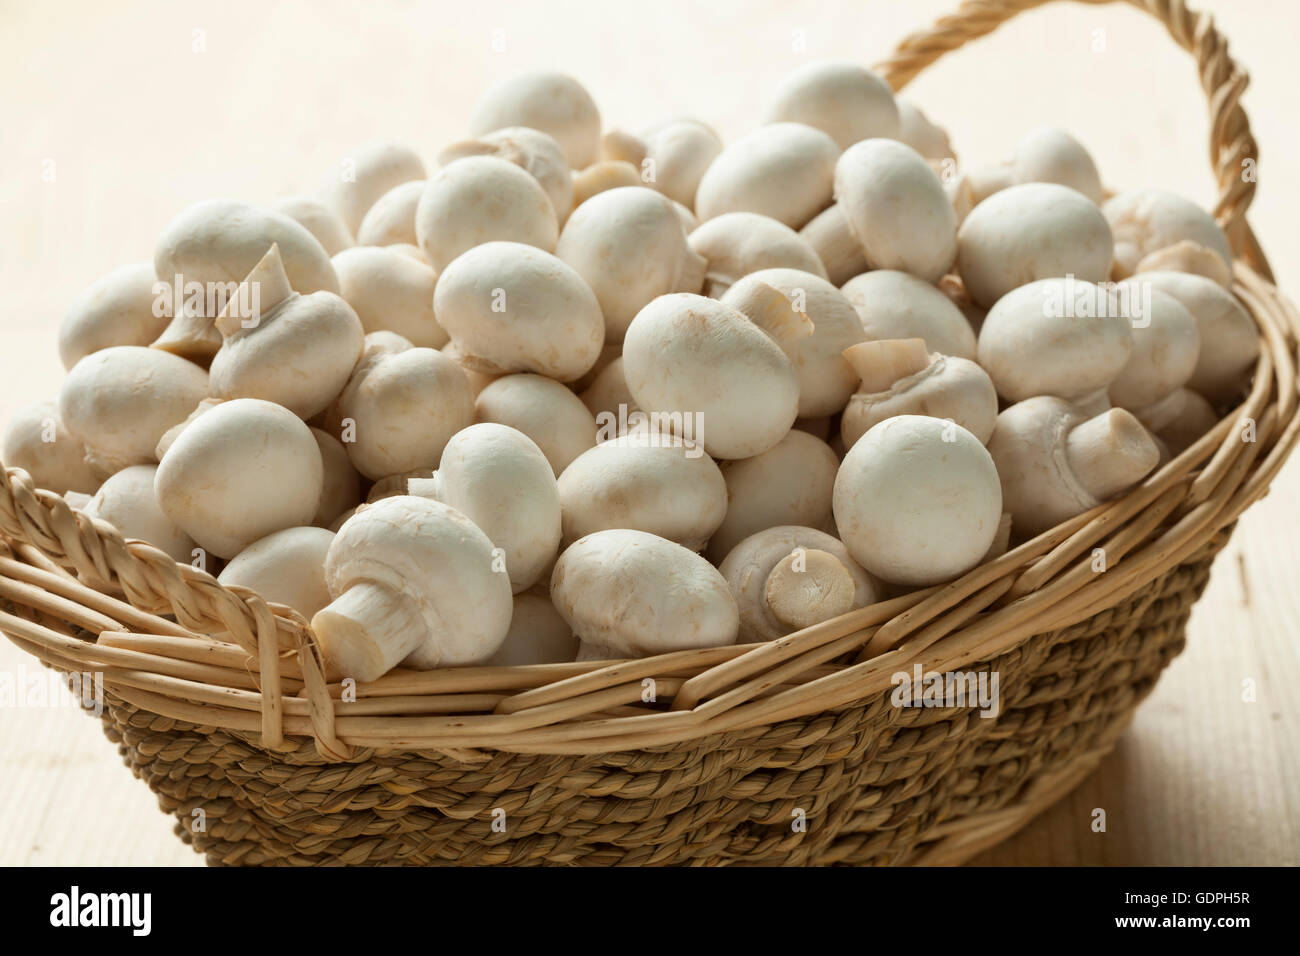 Basket with small white button mushrooms Stock Photo